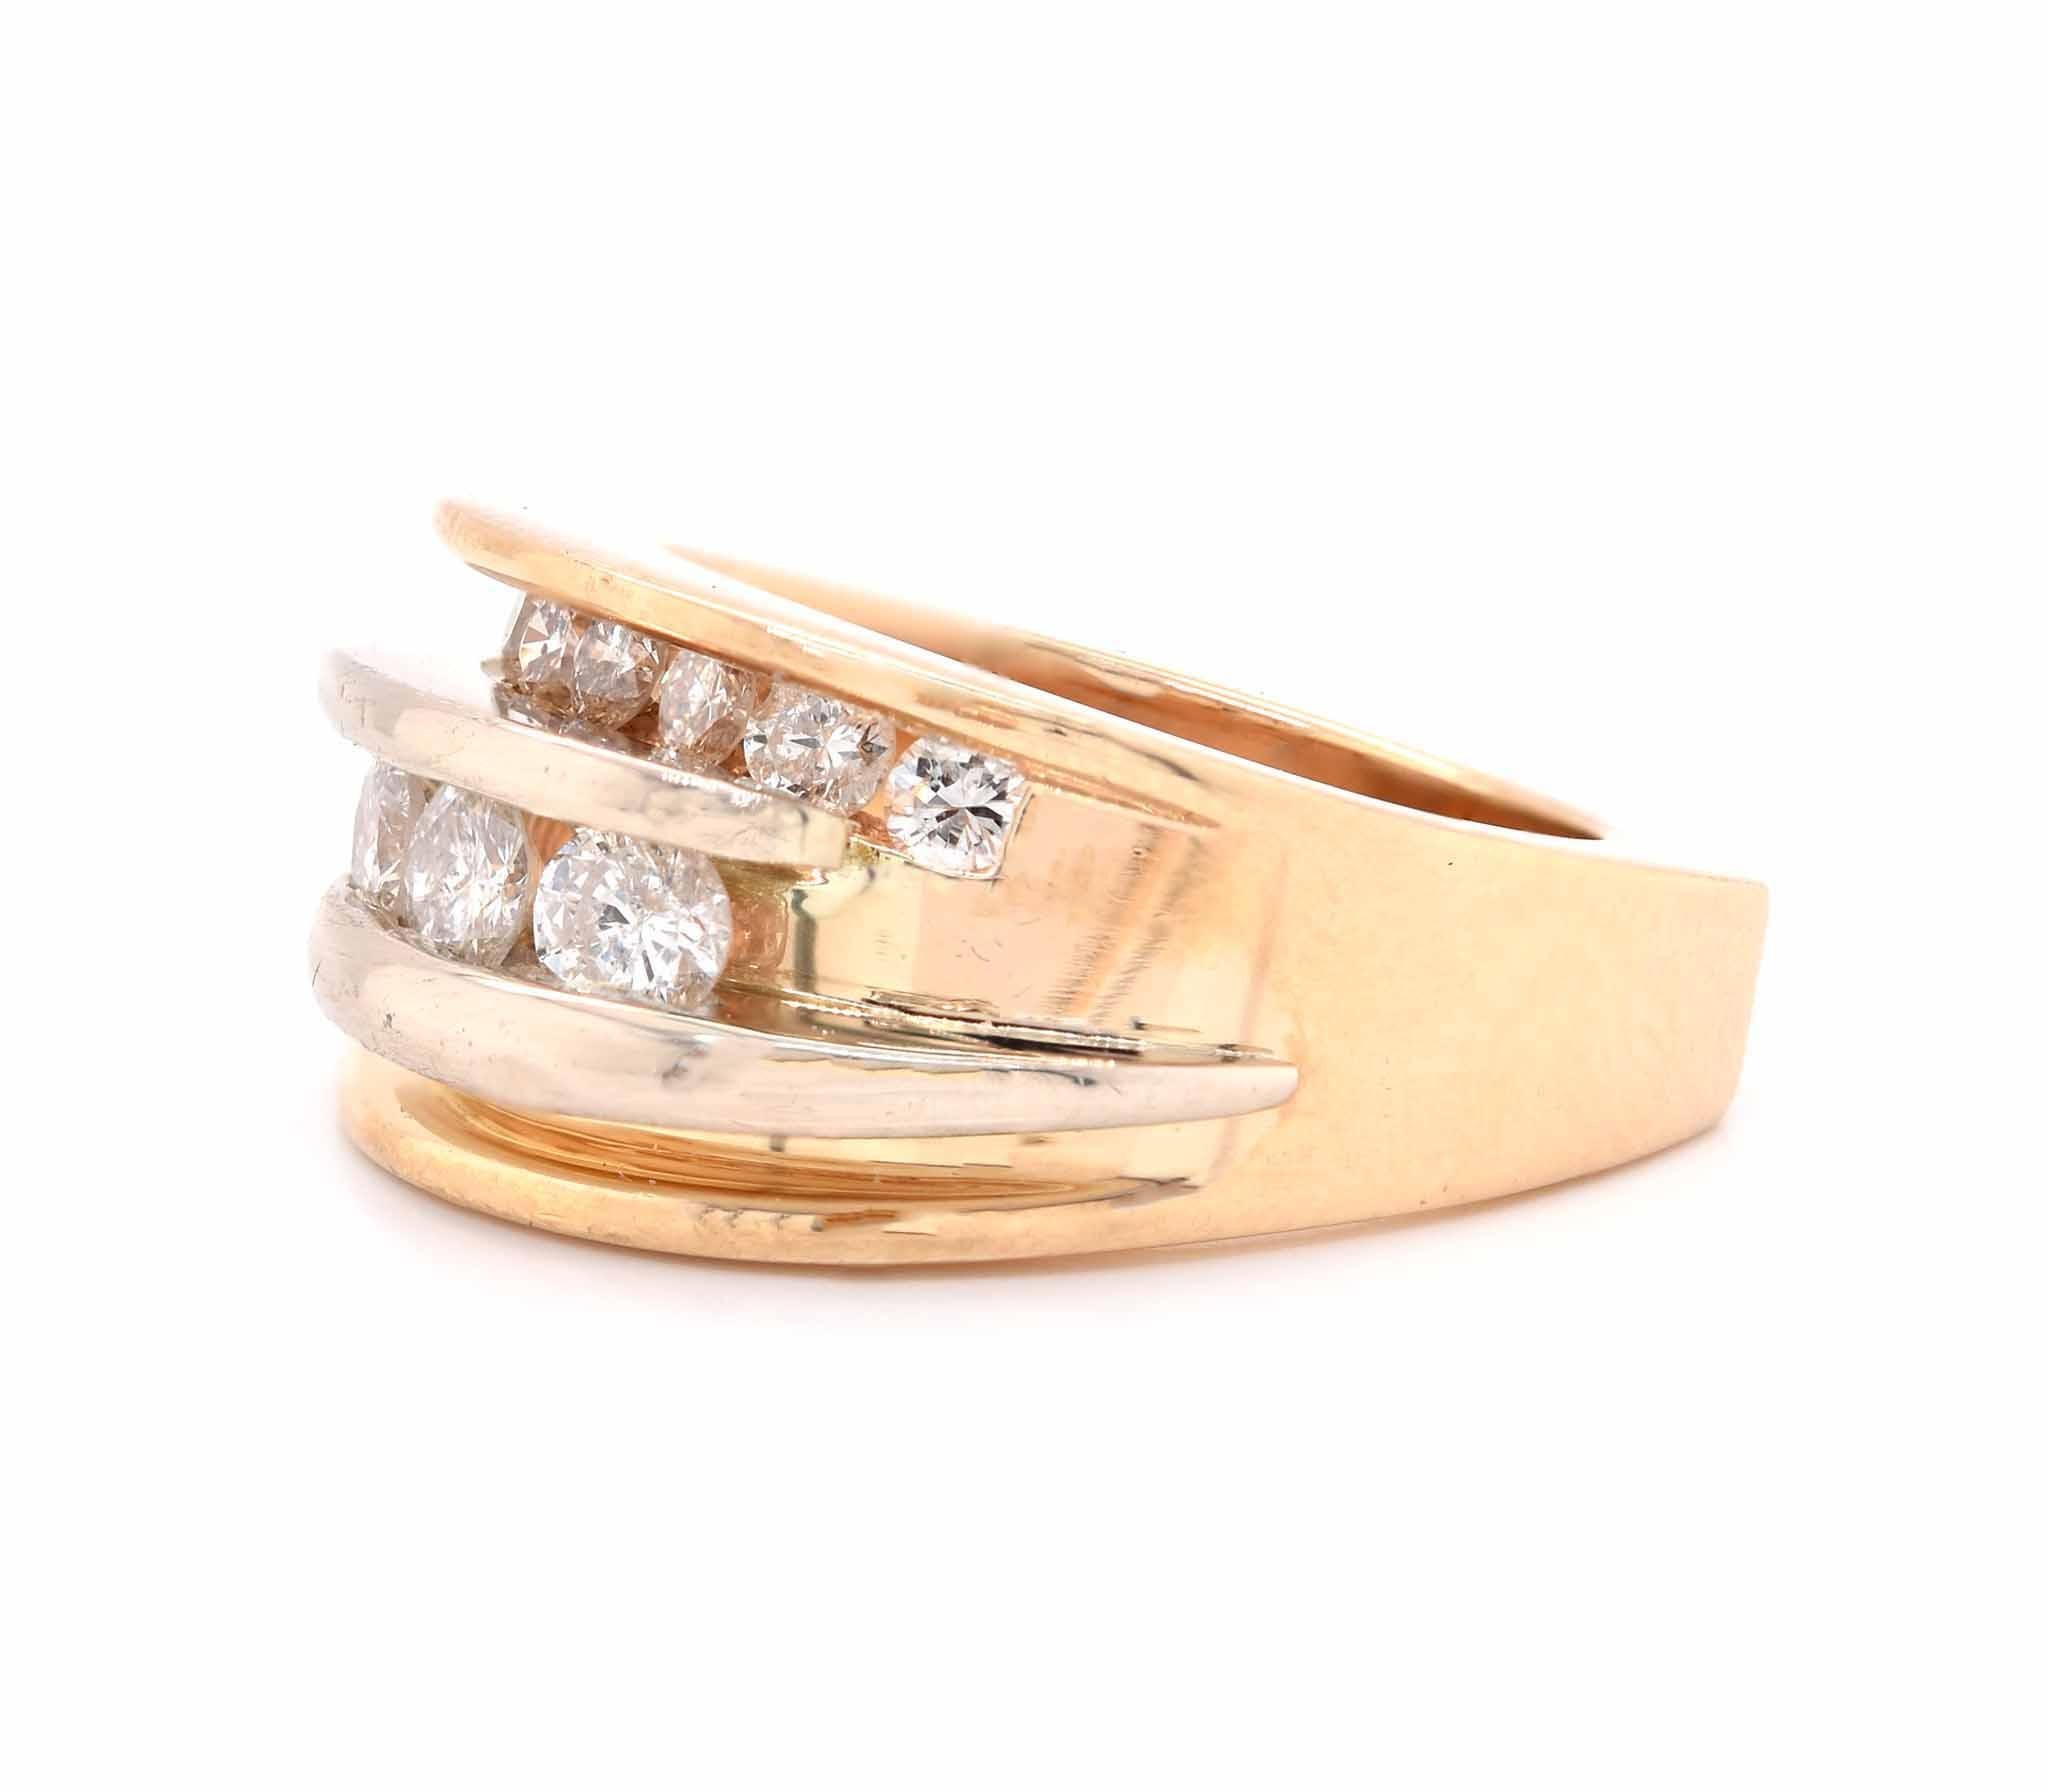 Designer: custom
Material: 14K yellow gold
Diamonds: 12 round brilliant cut = .85cttw
Color: H
Clarity: SI1
Ring size: 7 (please allow two additional shipping days for sizing requests)
Weight:  14.36 grams